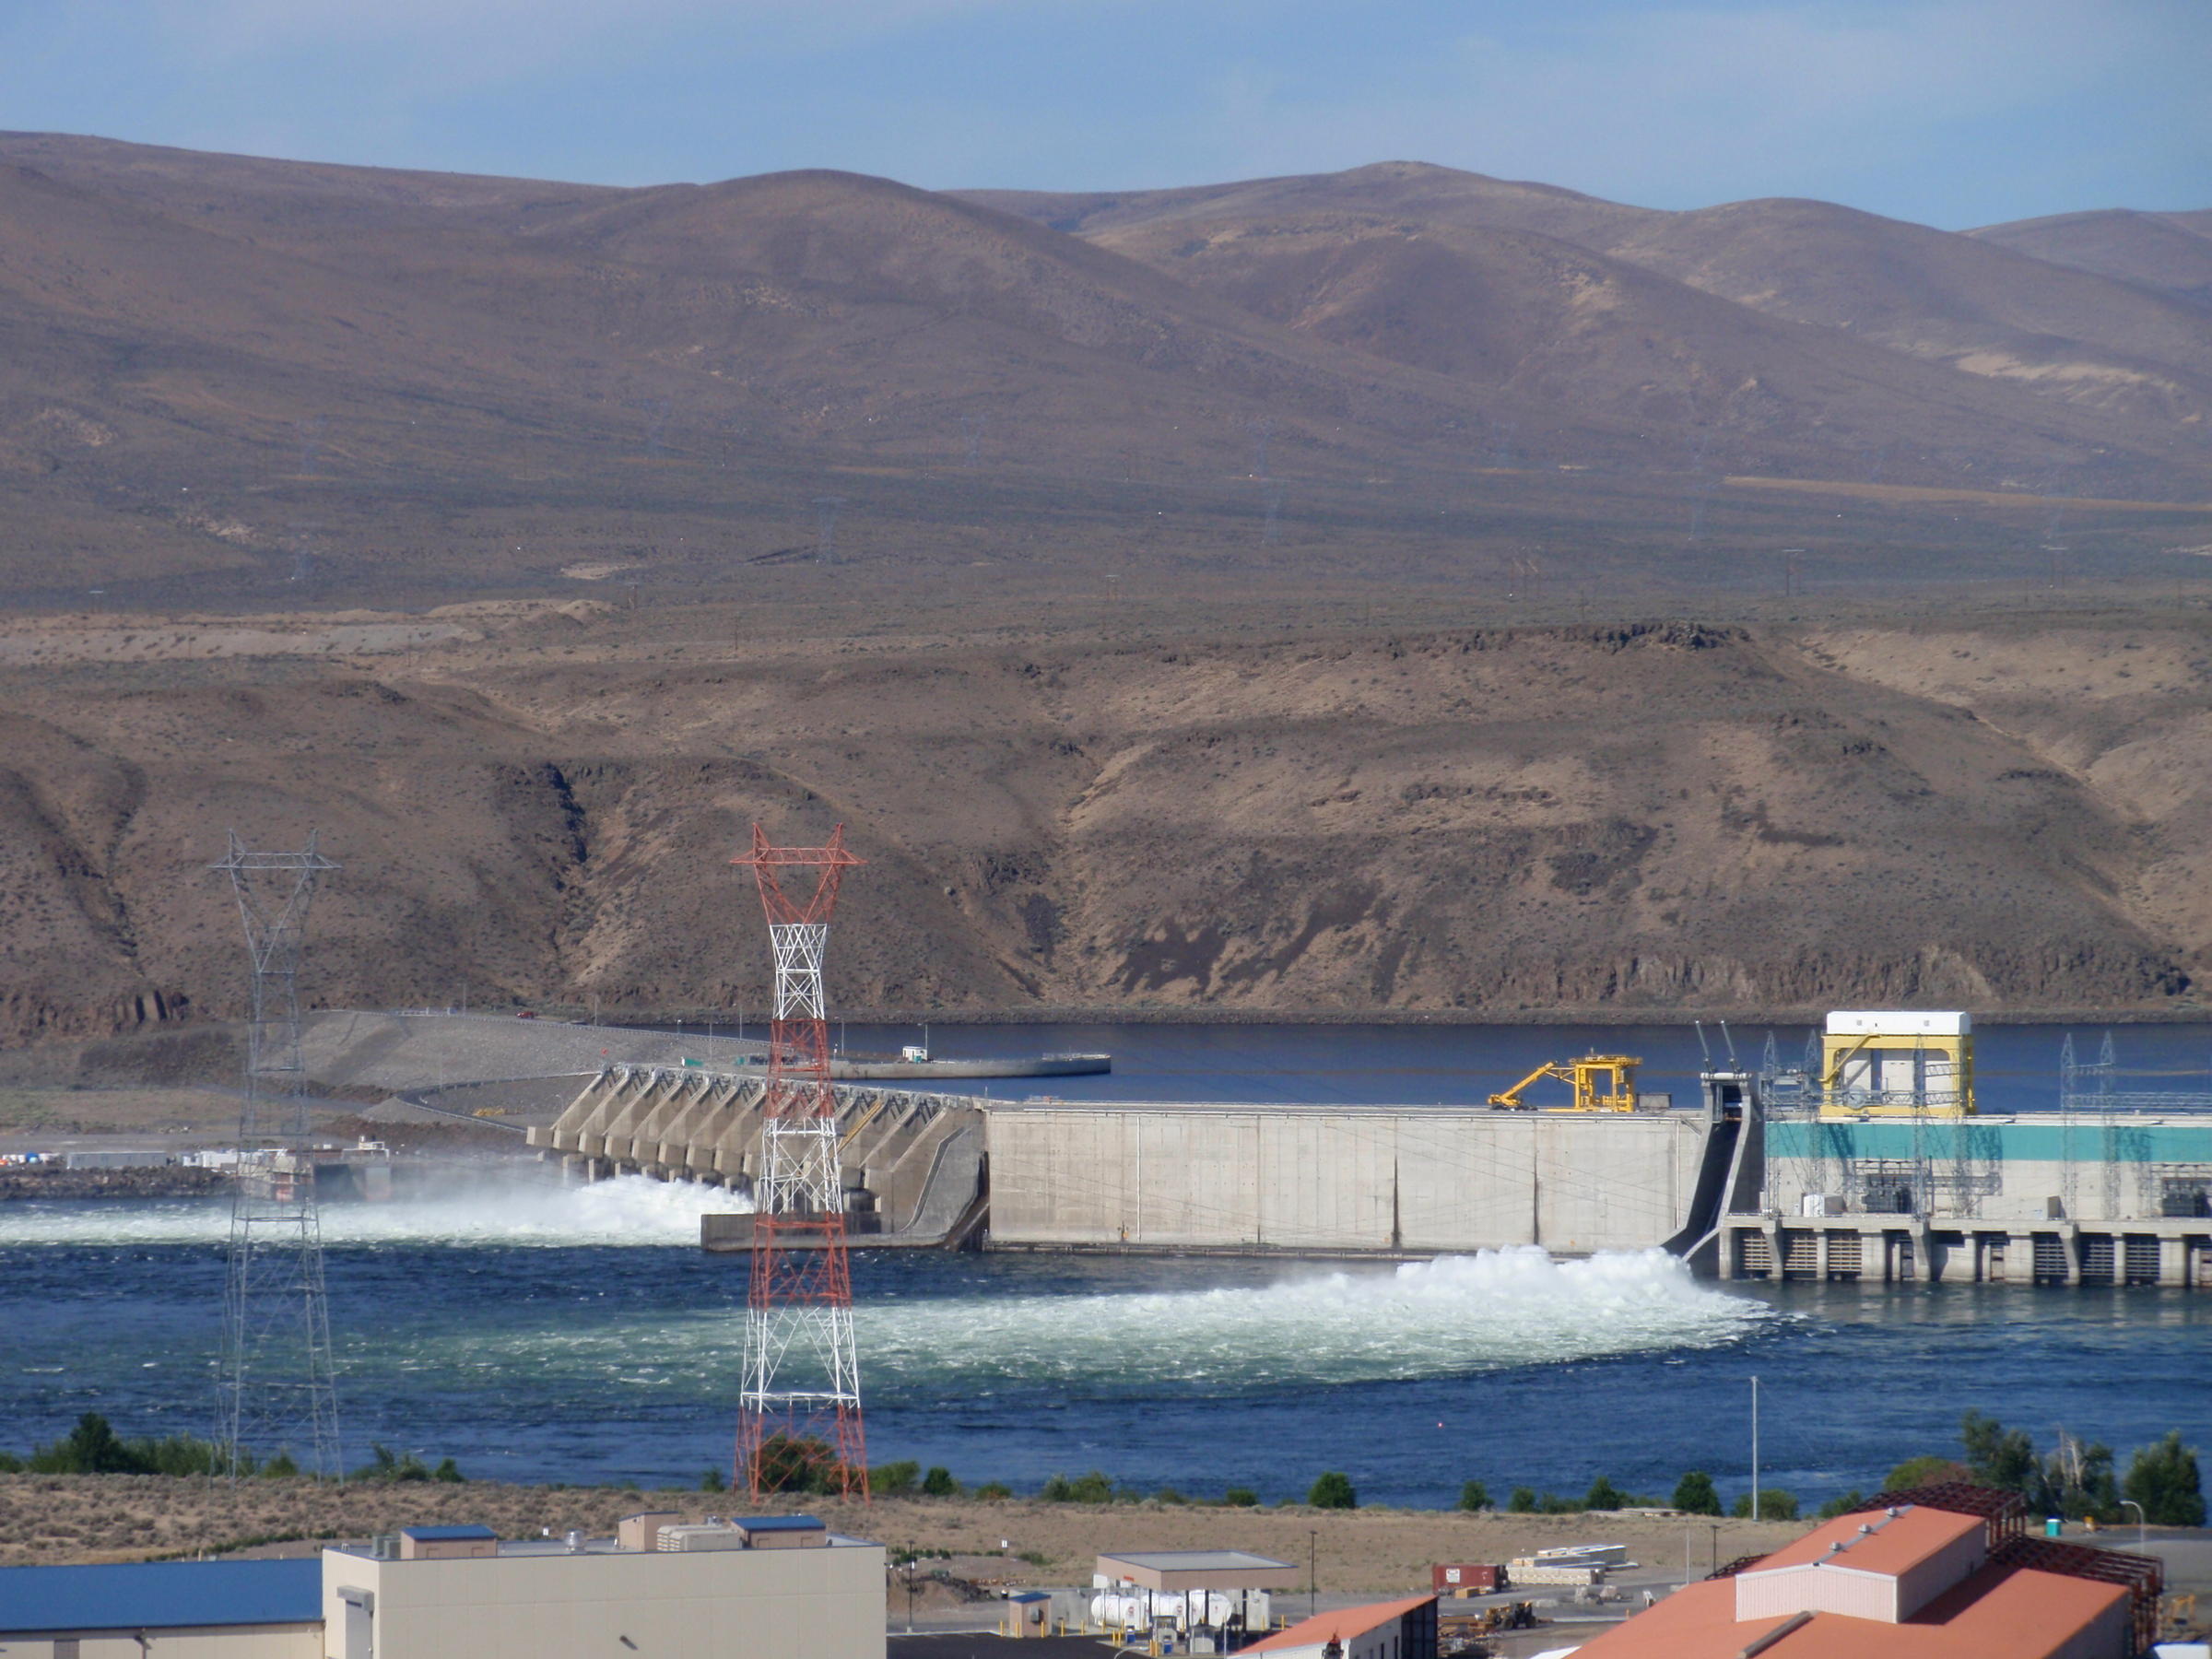 Grant PUD operates two dams on the Columbia River, including Wanapum Dam shown here, which provide its customers low cost hydropower. CREDIT: TOM BANSE / NW NEWS NETWORK